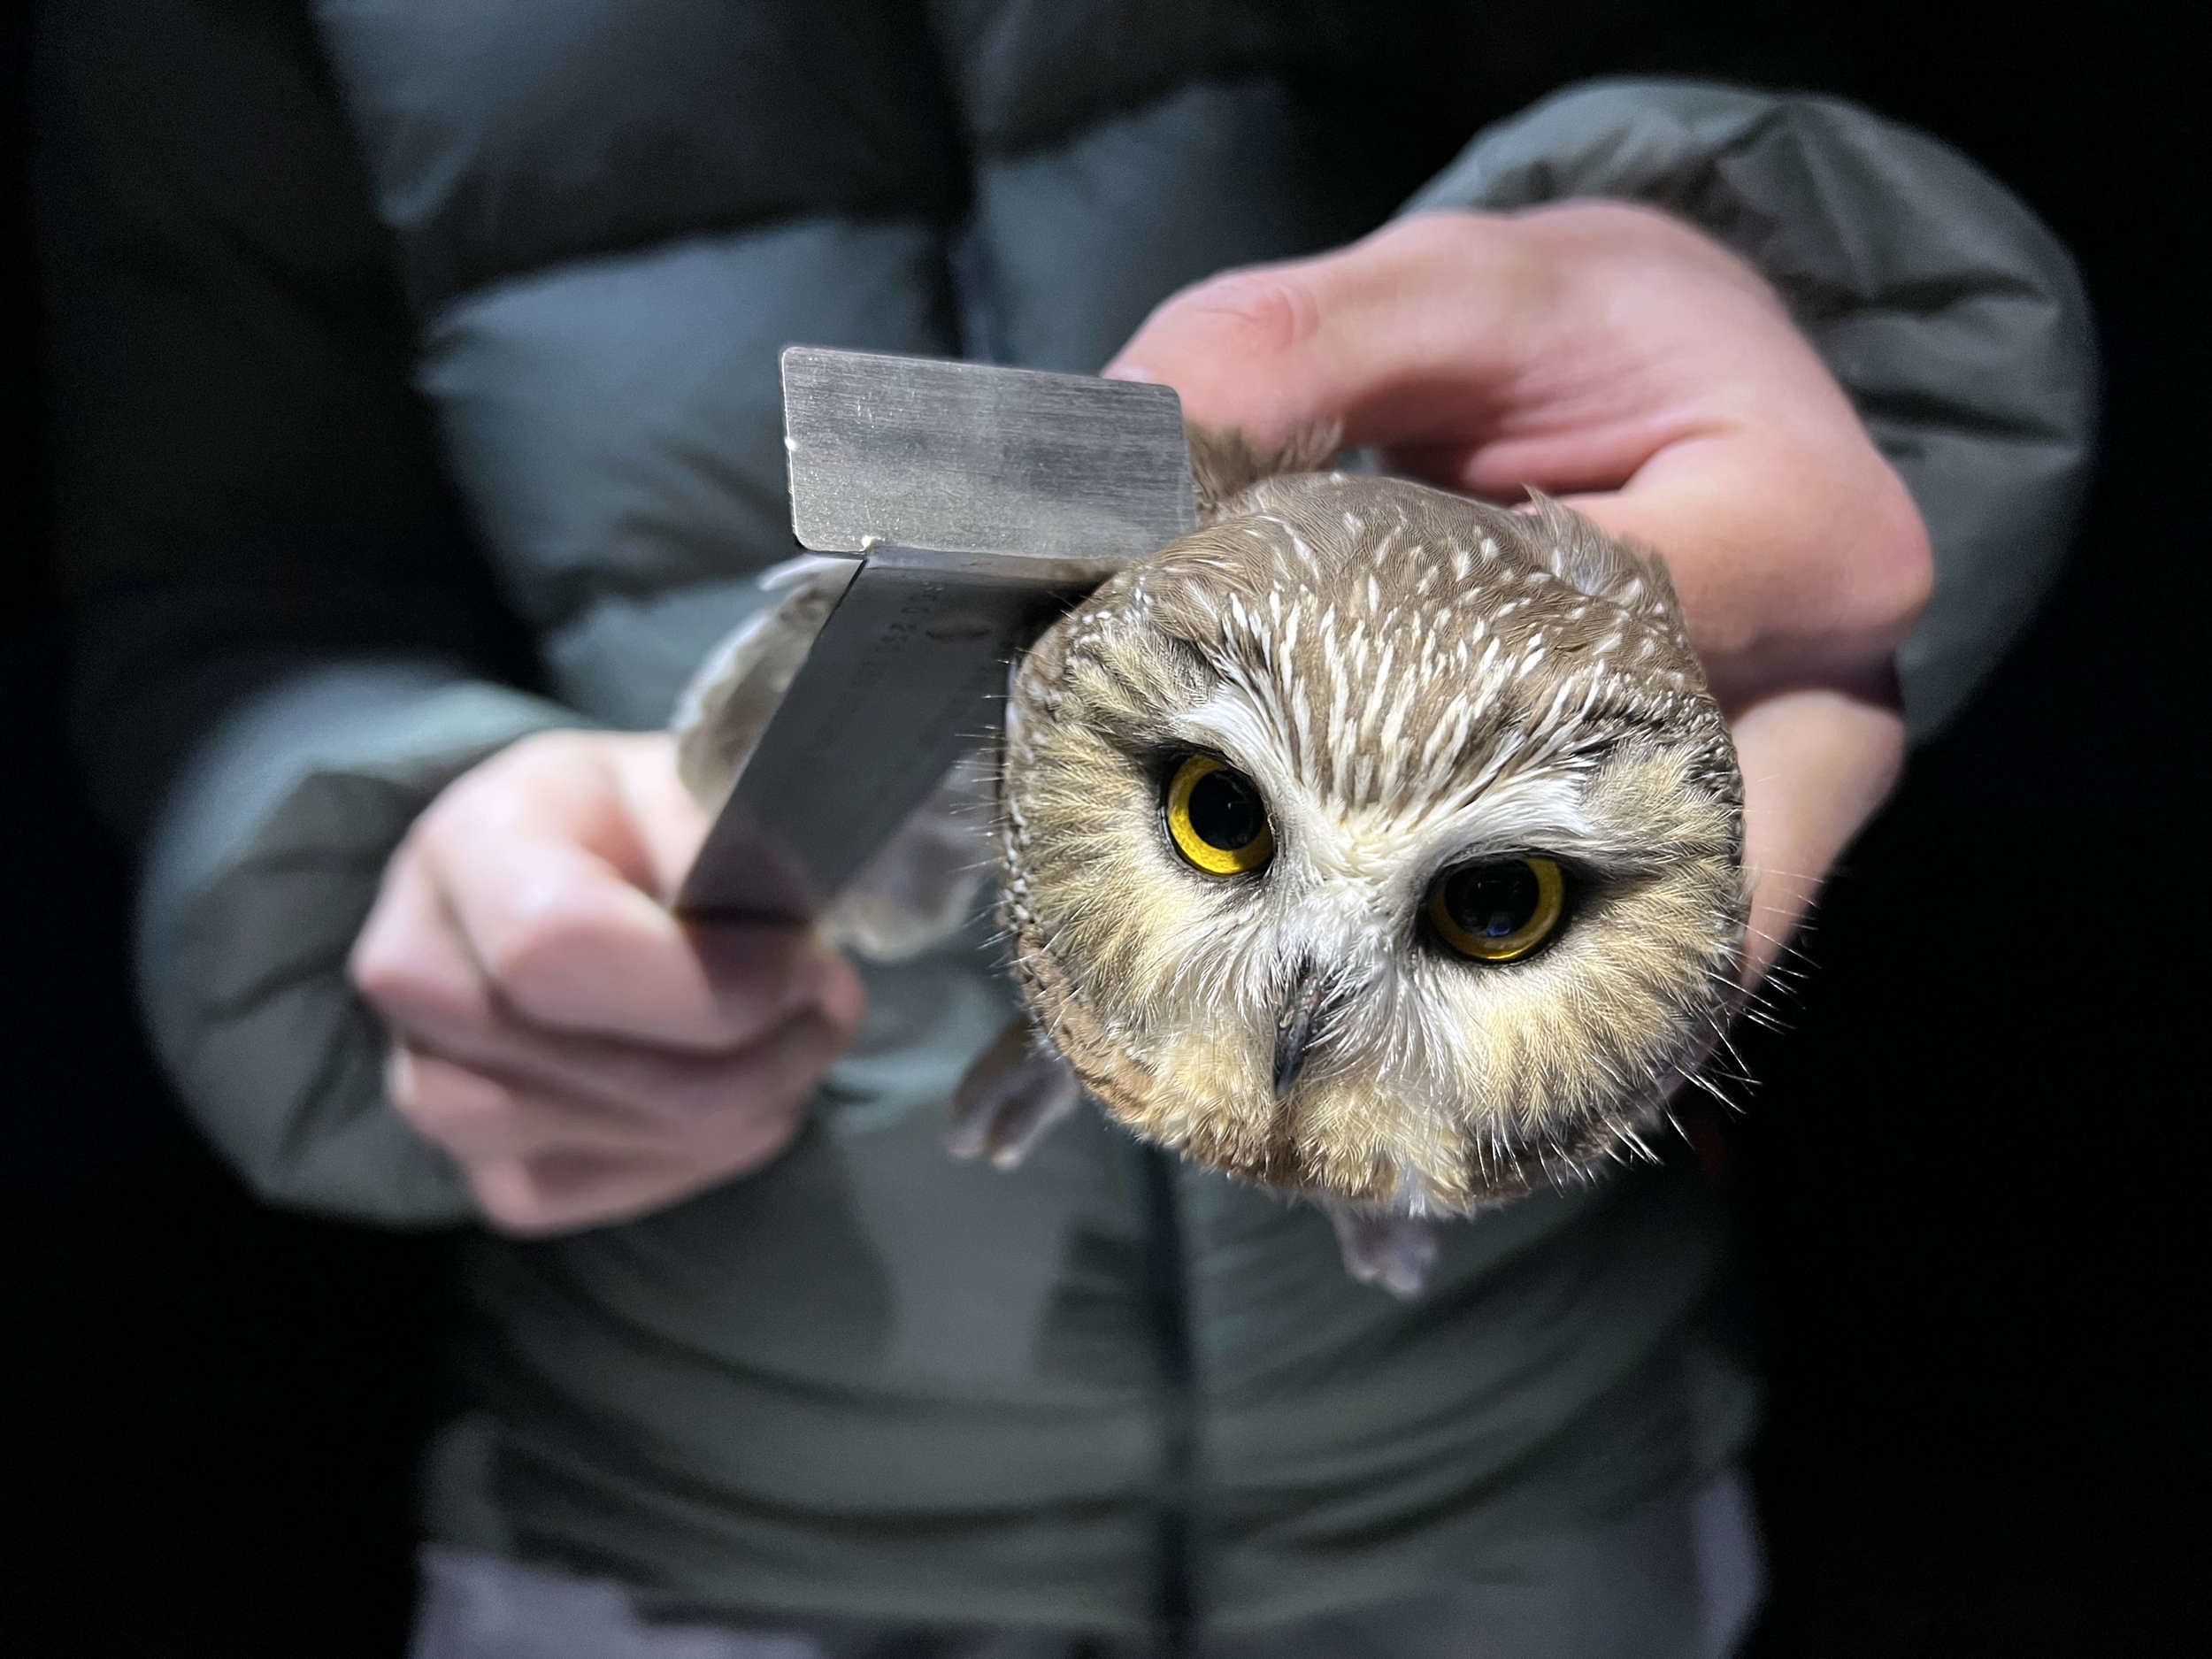 An owl bander uses a metal ruler to measure the wing chord of a saw-whet owl. (photo © Brett Amy Thelen)